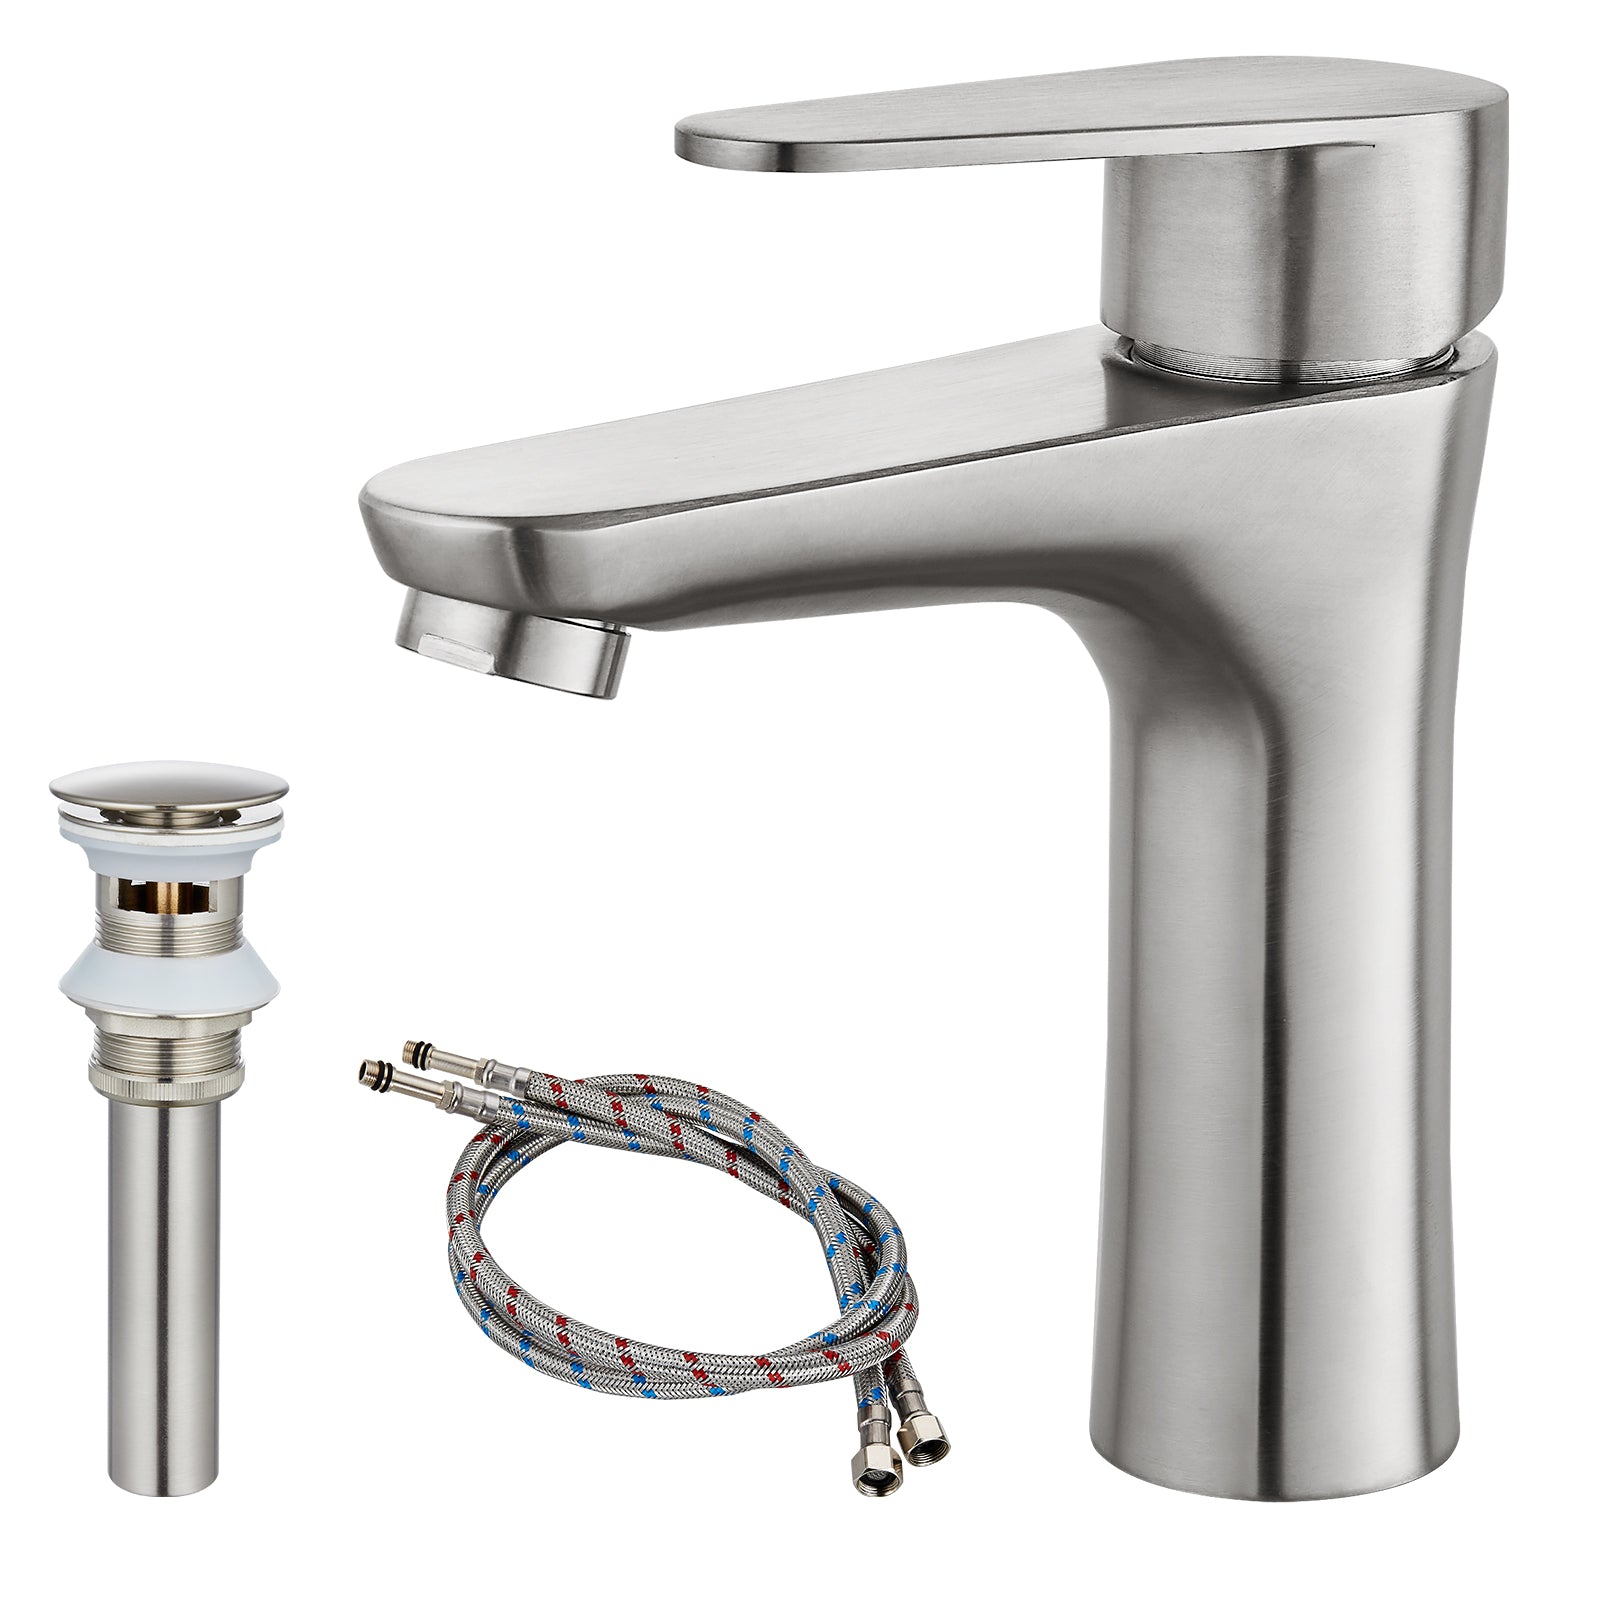 Heyalan Brushed Nickel Bathroom Faucet Single Handle 1 Hole SUS304 Stainless Steel Deck Mount Lavatory Single Switch Basin Sink Hot and Cold Water Mixer Tap with Pop Up Drain